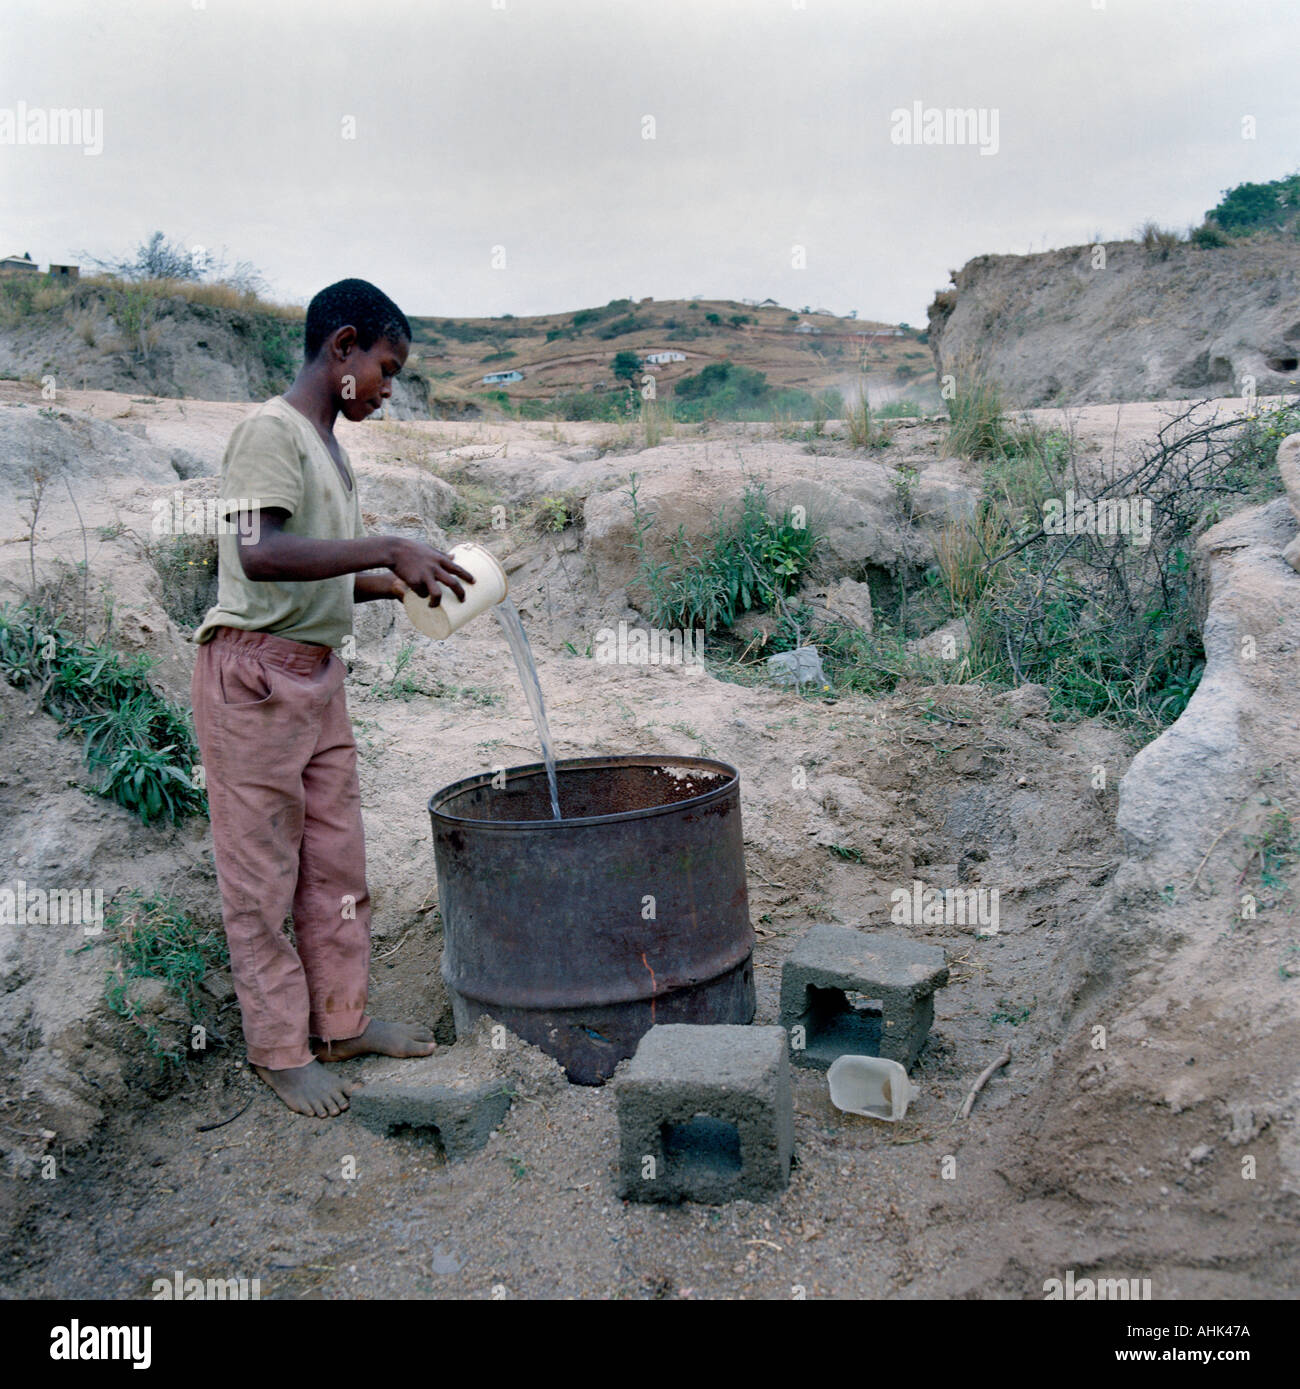 Child collecting water from an unsafe raw supply in the Transvaal South Africa, risking contamination and disease. Stock Photo